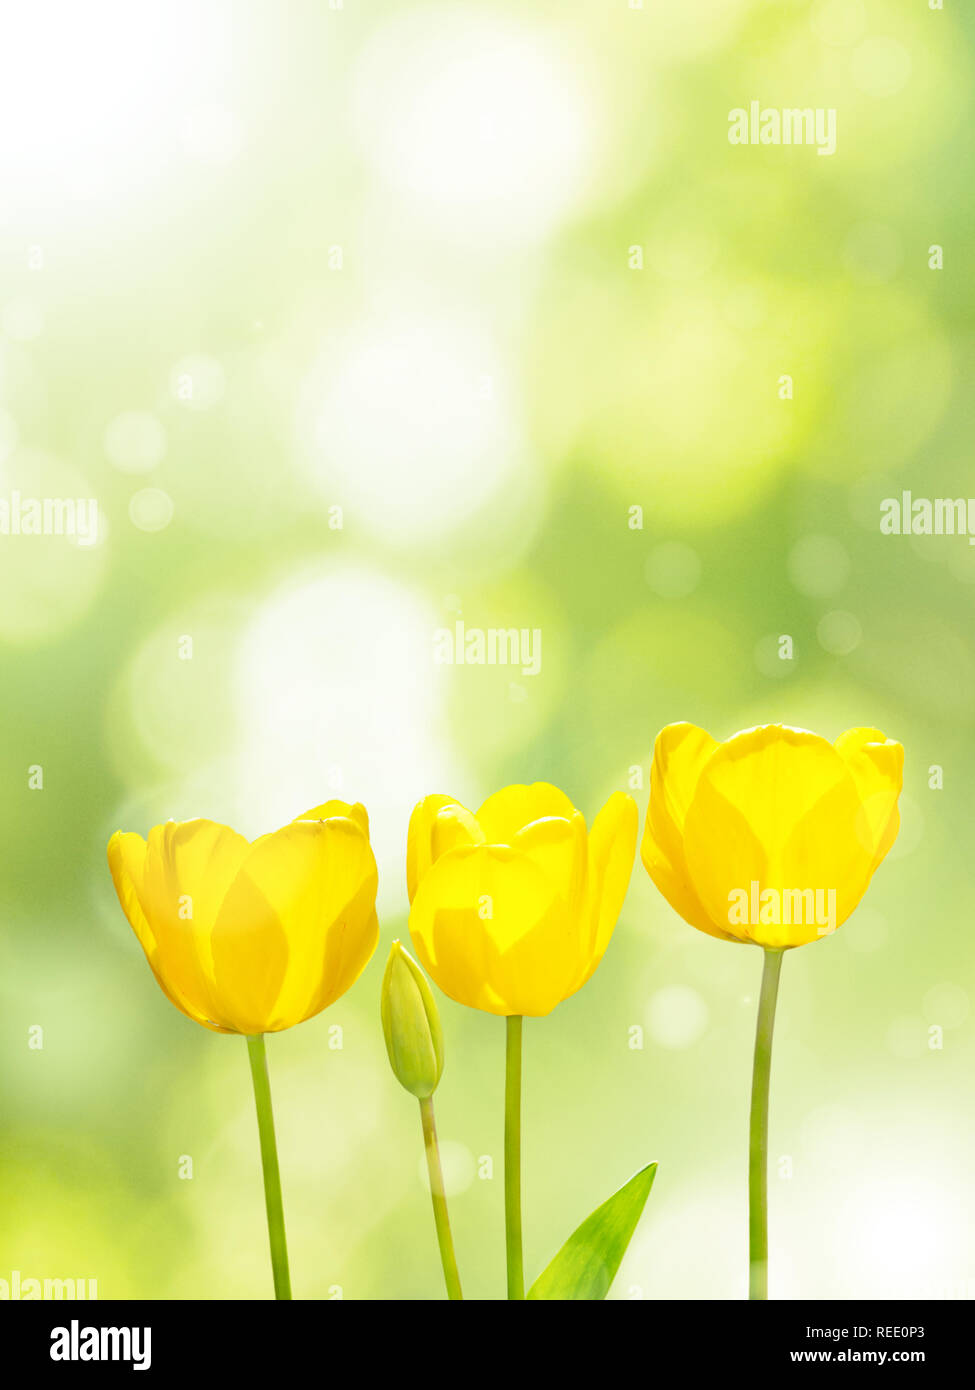 Three bright yellow tulips on the blurred green background. Three flowers in the spring sunny garden. Stock Photo